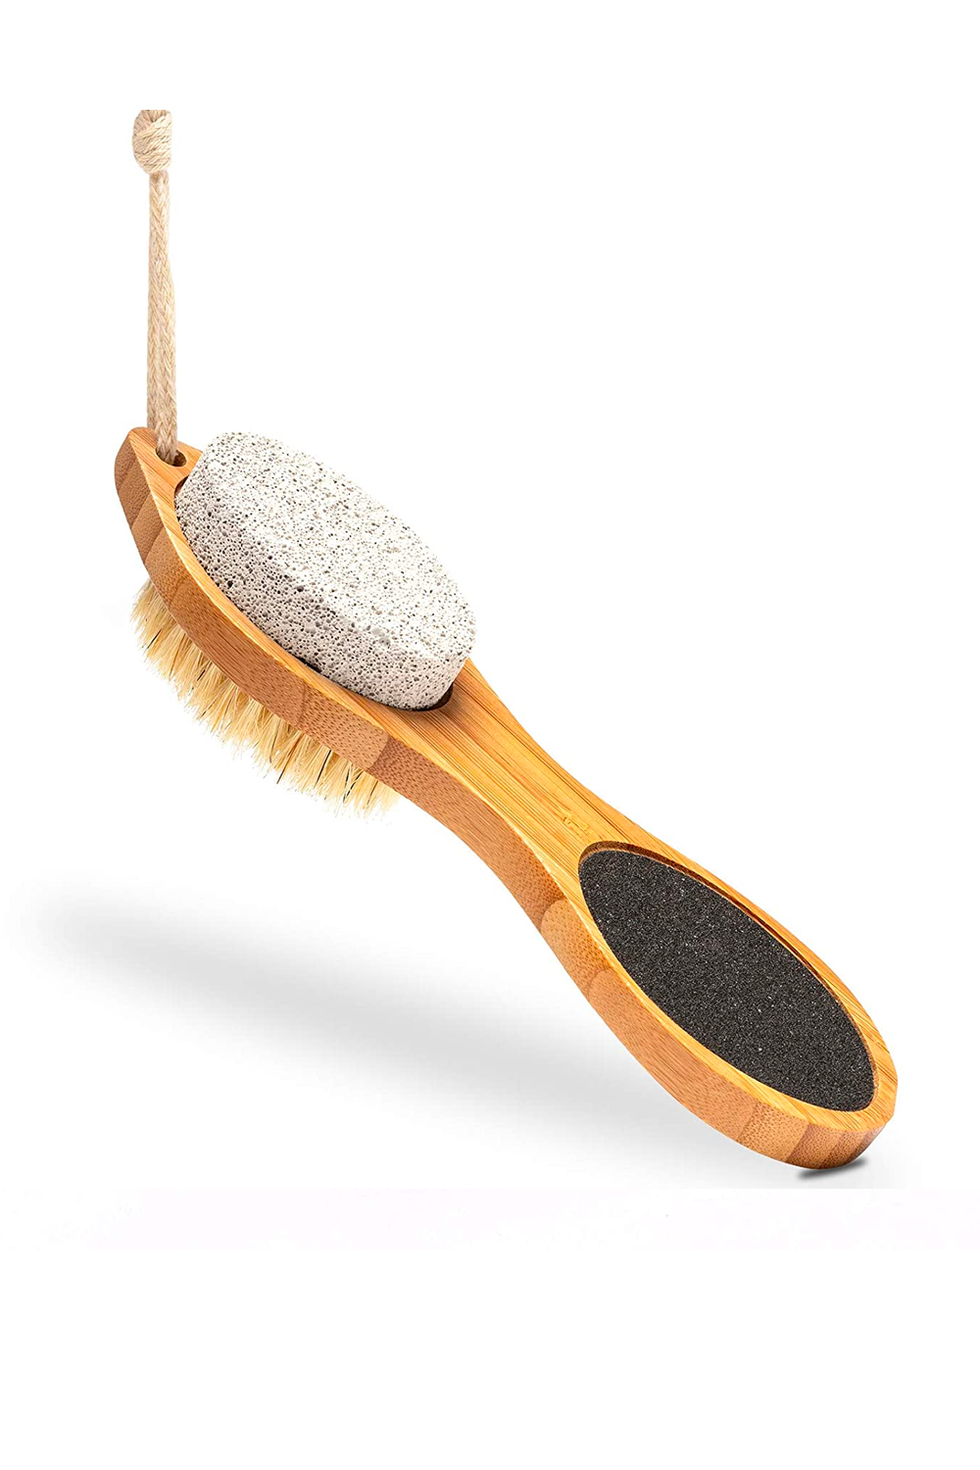 Pumice Stone Vs. Foot File: Which Is Better For Your Feet?